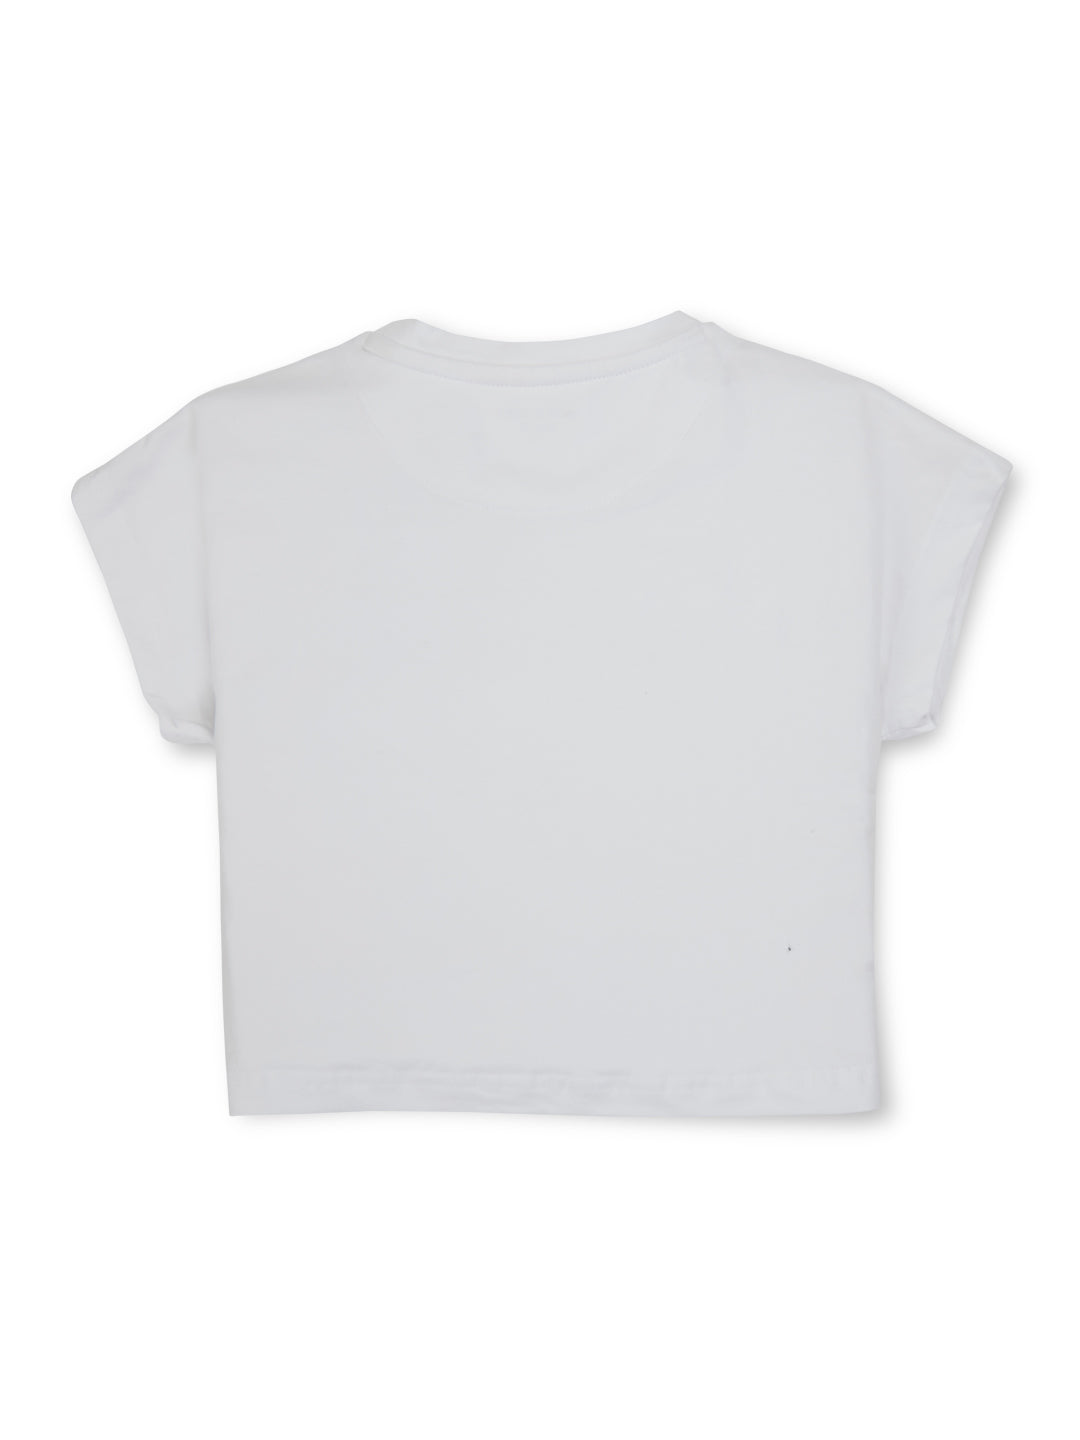 Girls White Solid Cotton Knits Top